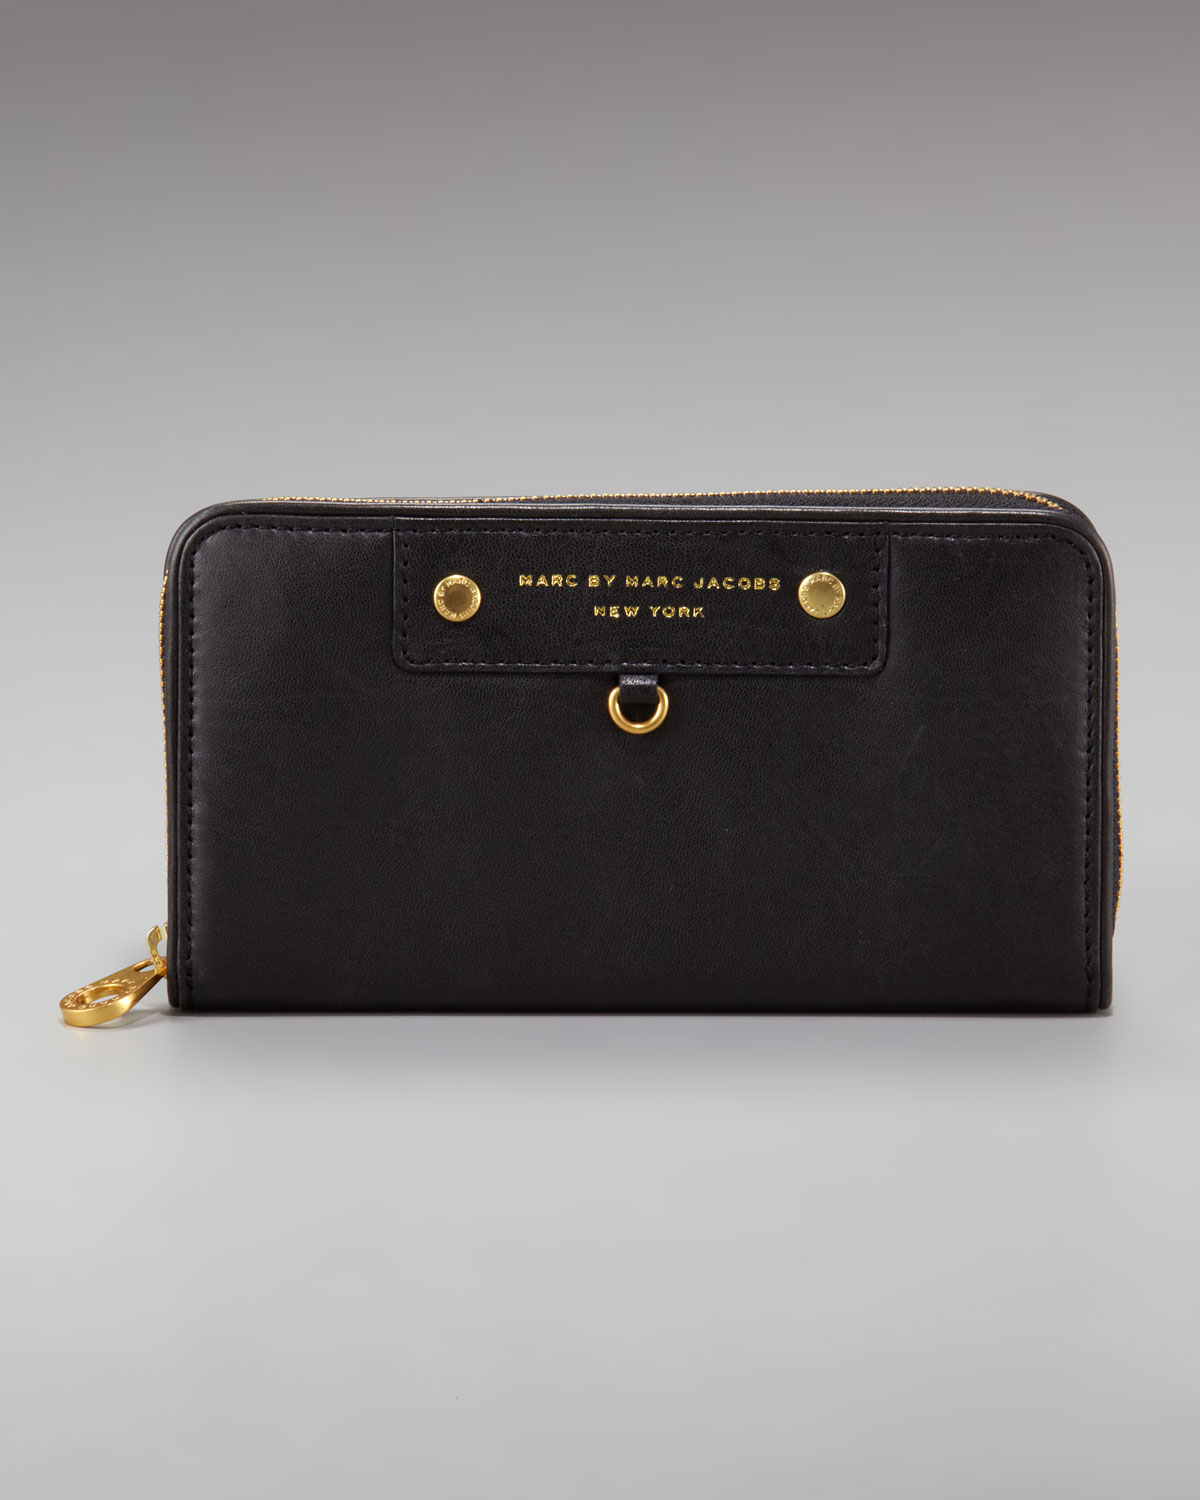 Lyst - Marc By Marc Jacobs Preppy Large Zip-around Leather Wallet in Black